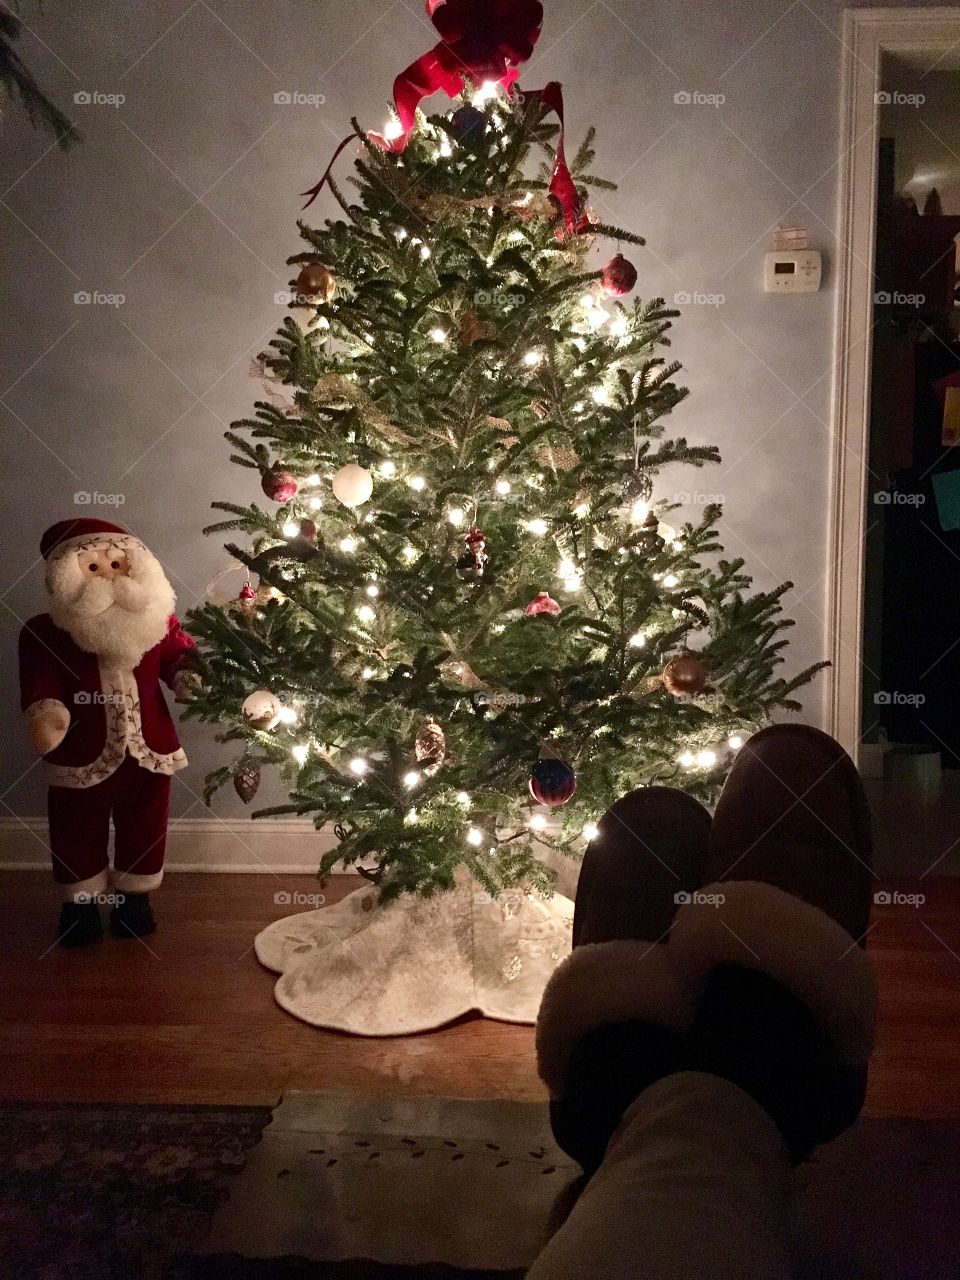 Relaxing in front of the Christmas tree 